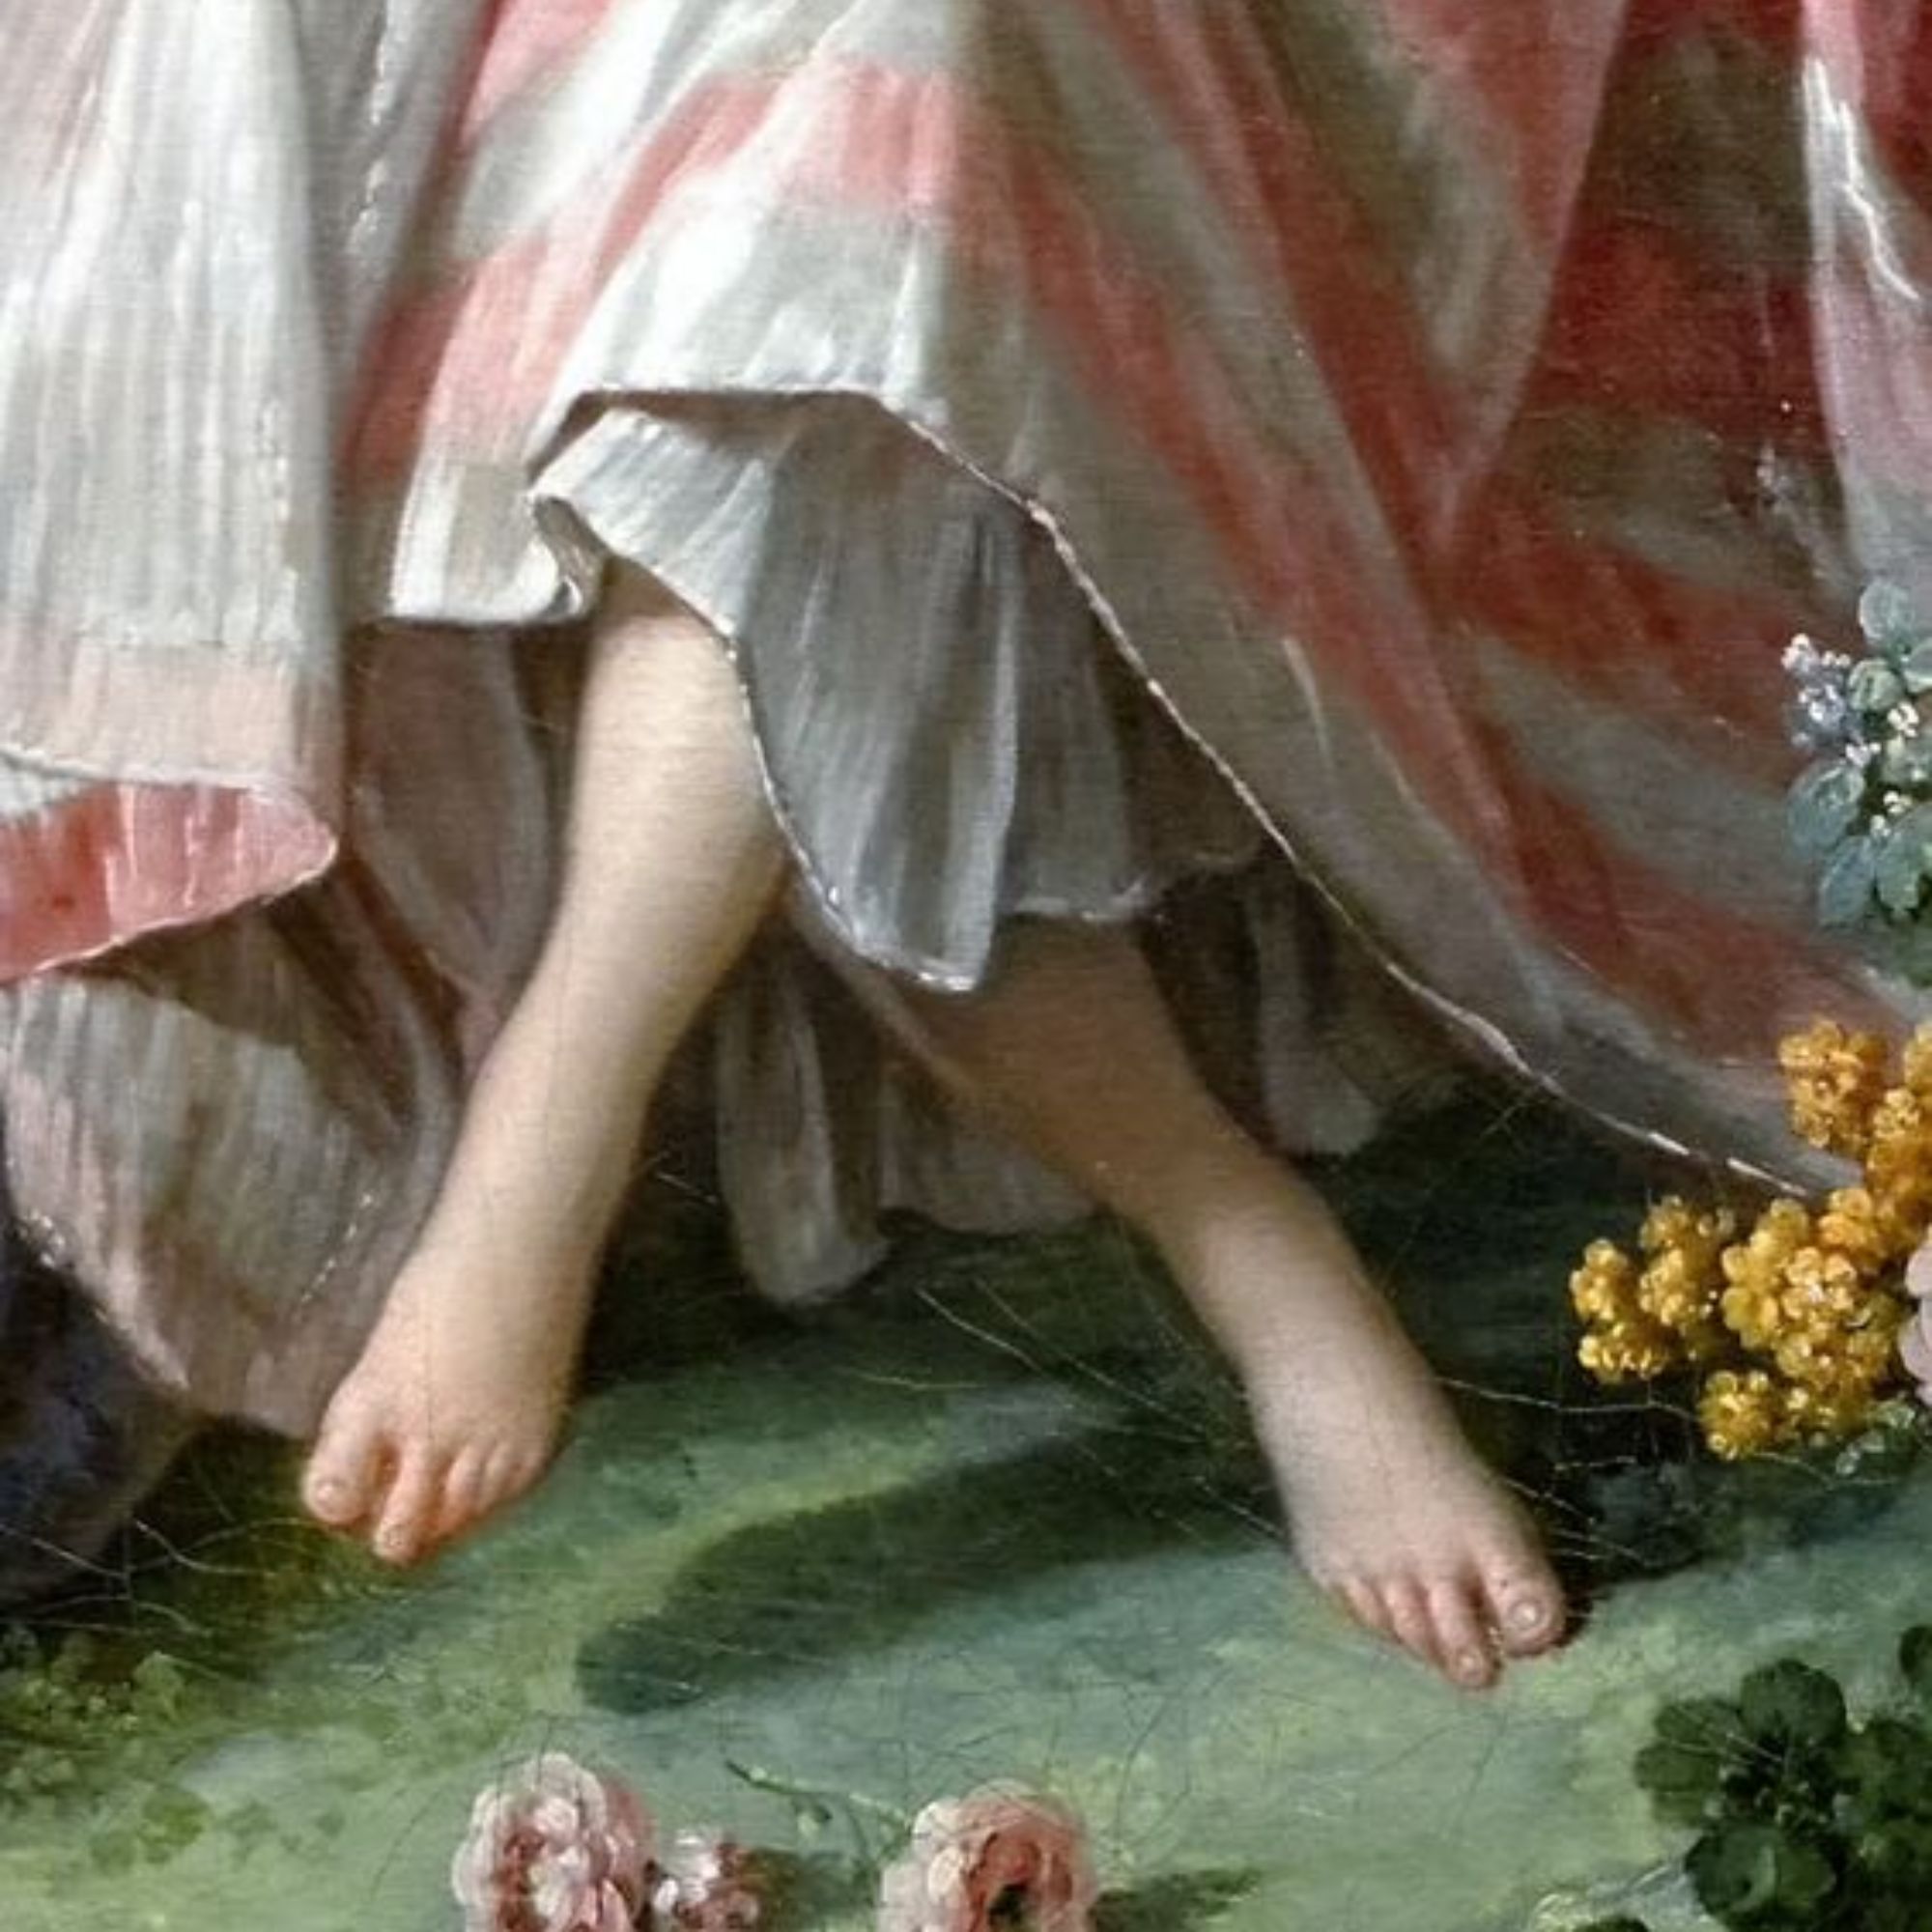 Foot fetish in the 18th century